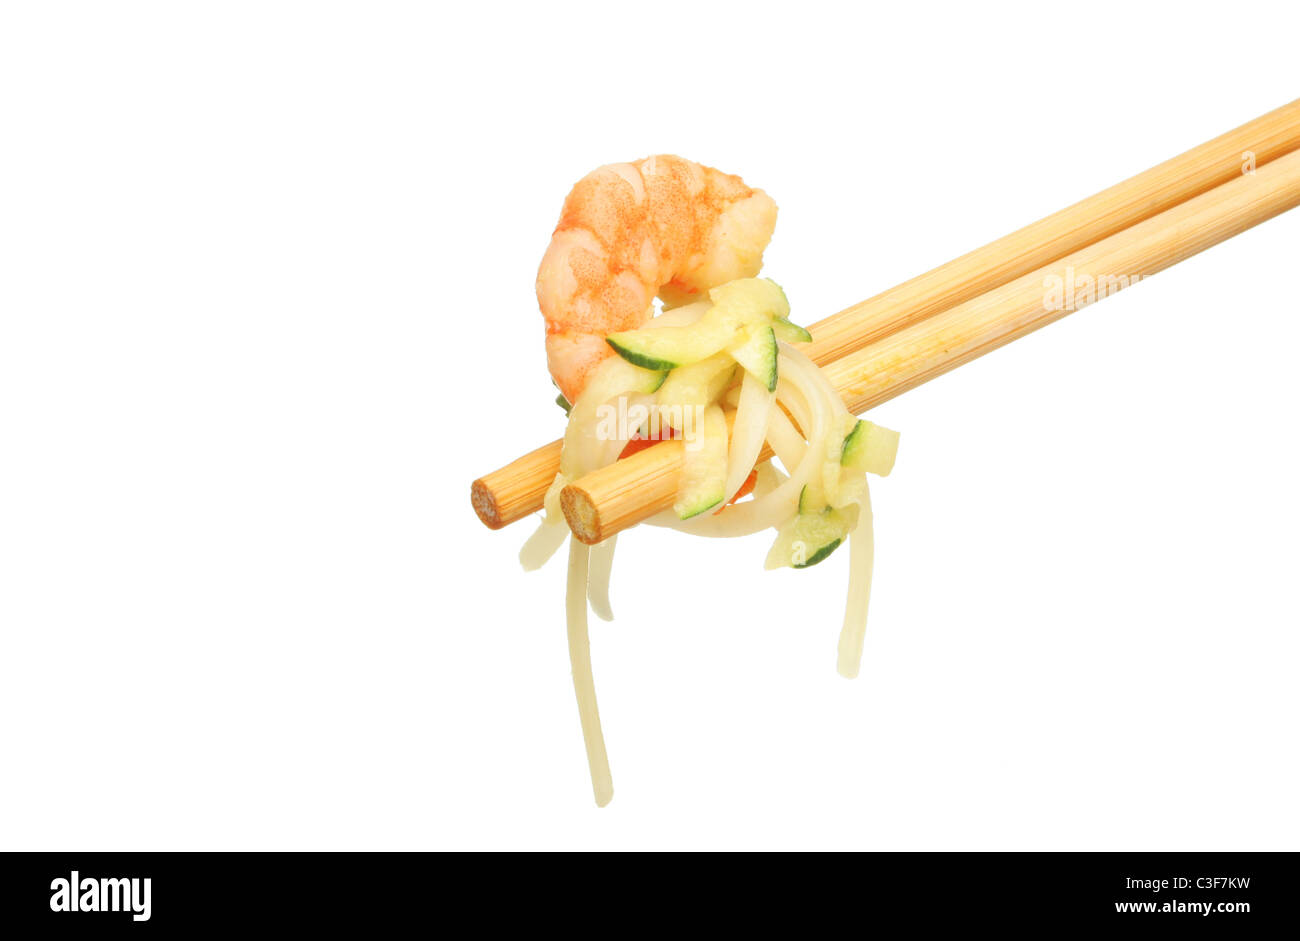 King prawn with vegetables and noodles in chopsticks isolated against white Stock Photo